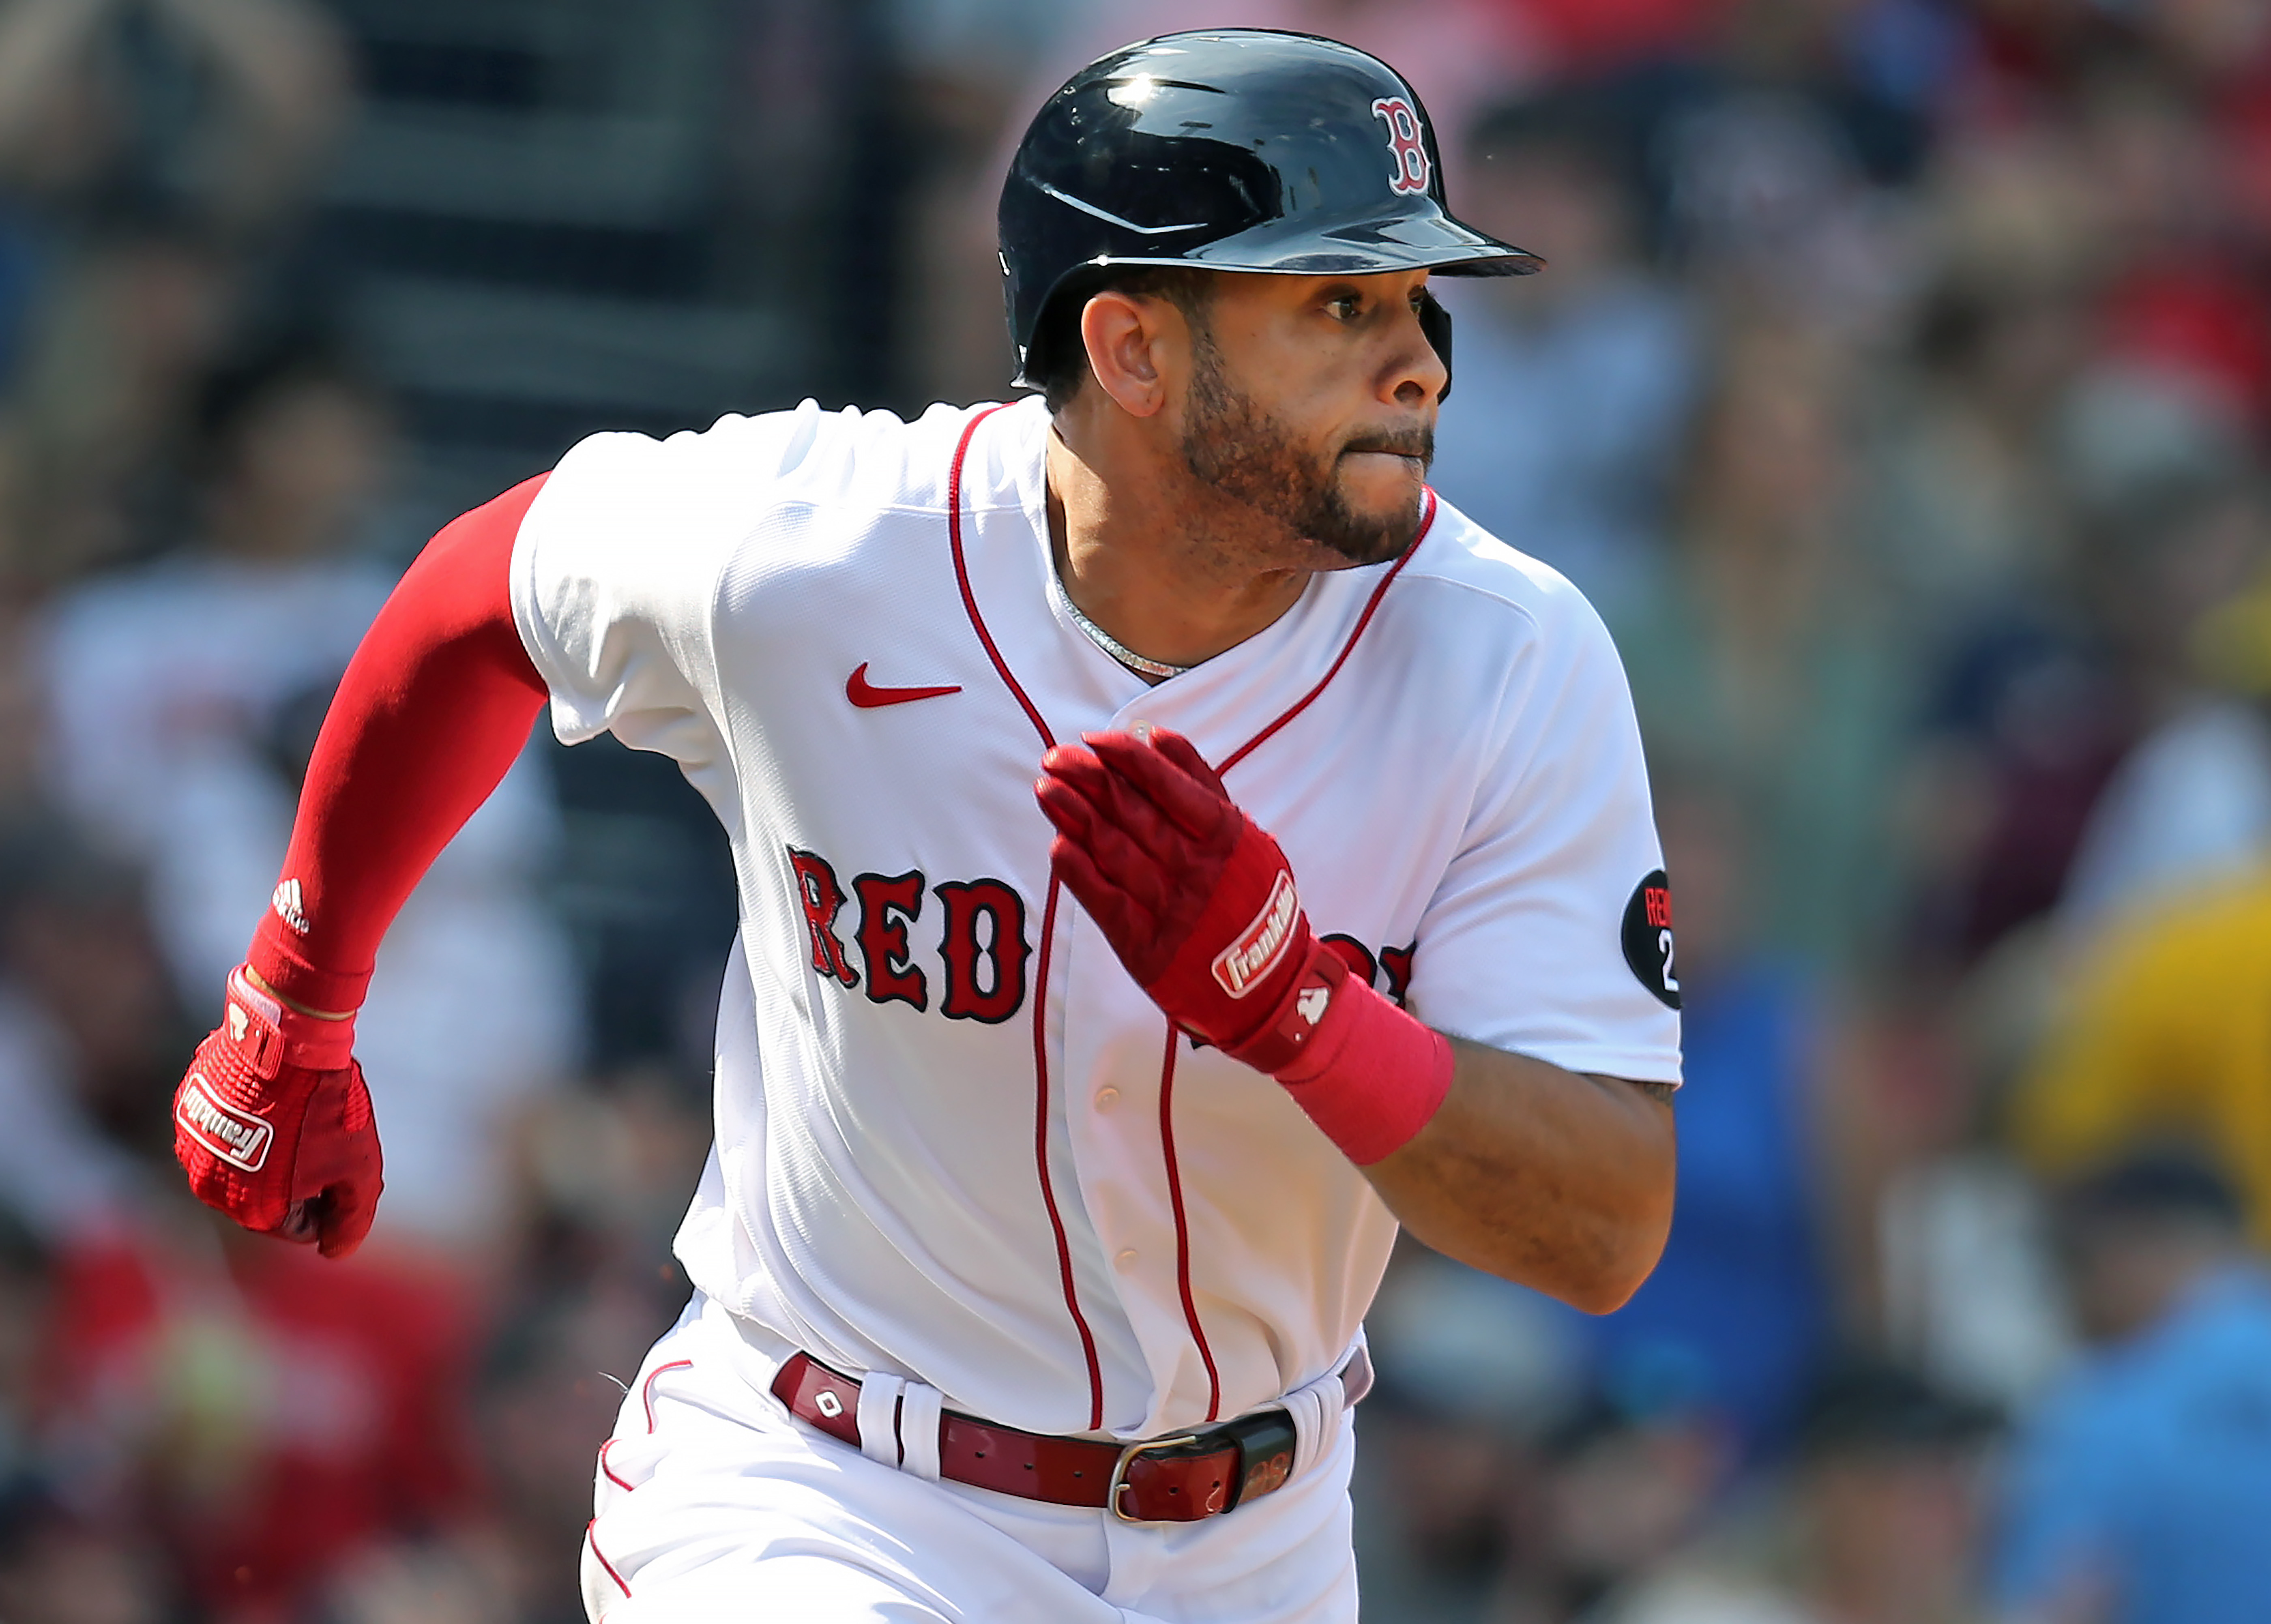 It's been a tough season for Red Sox outfielder Tommy Pham, but as